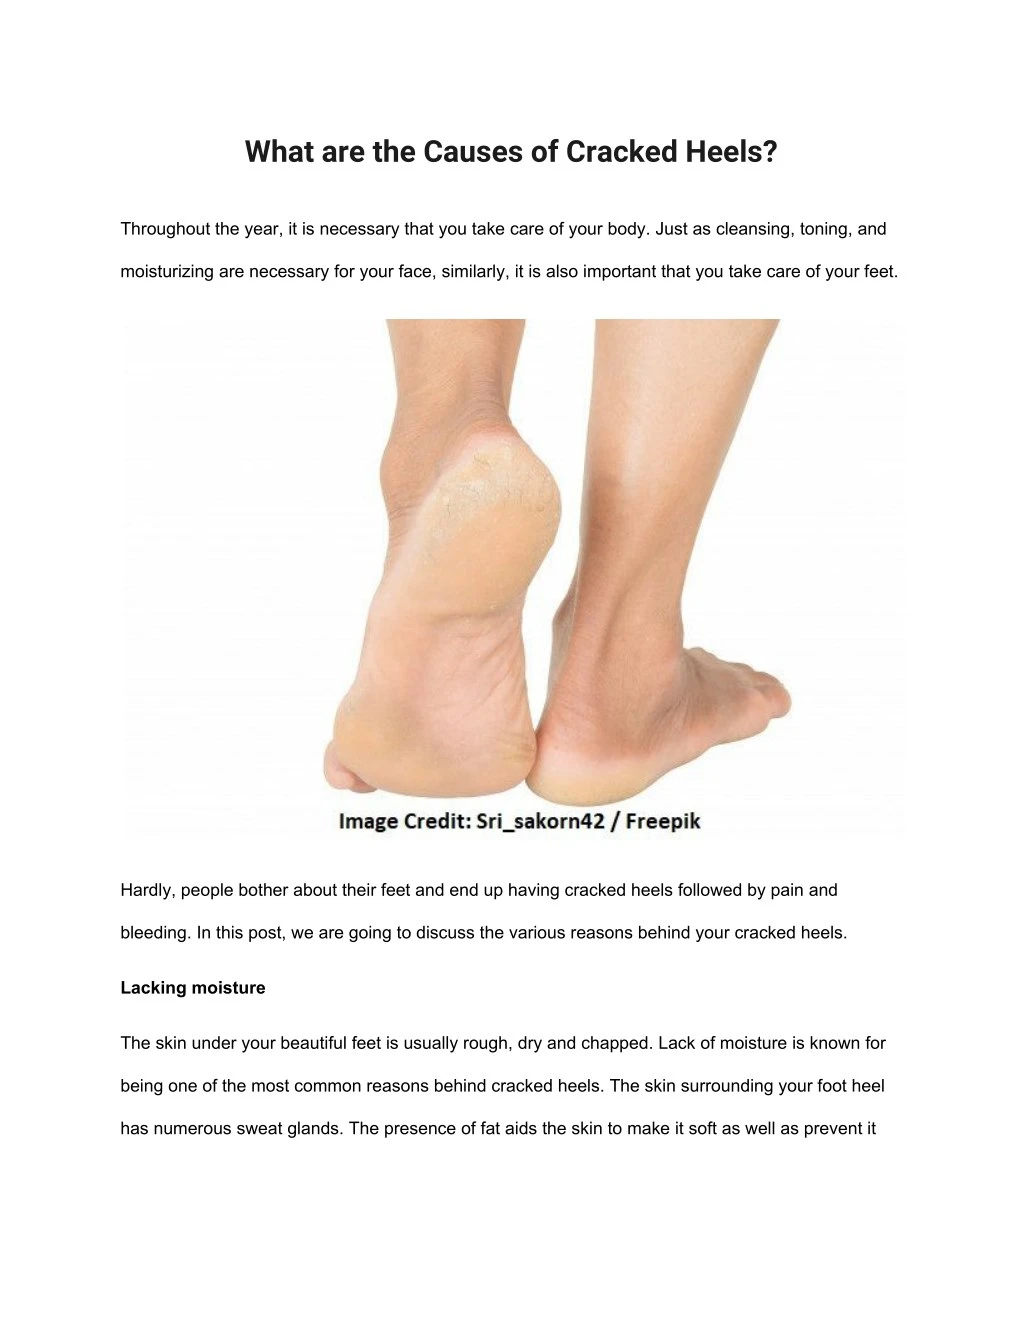 what are the causes of cracked heels